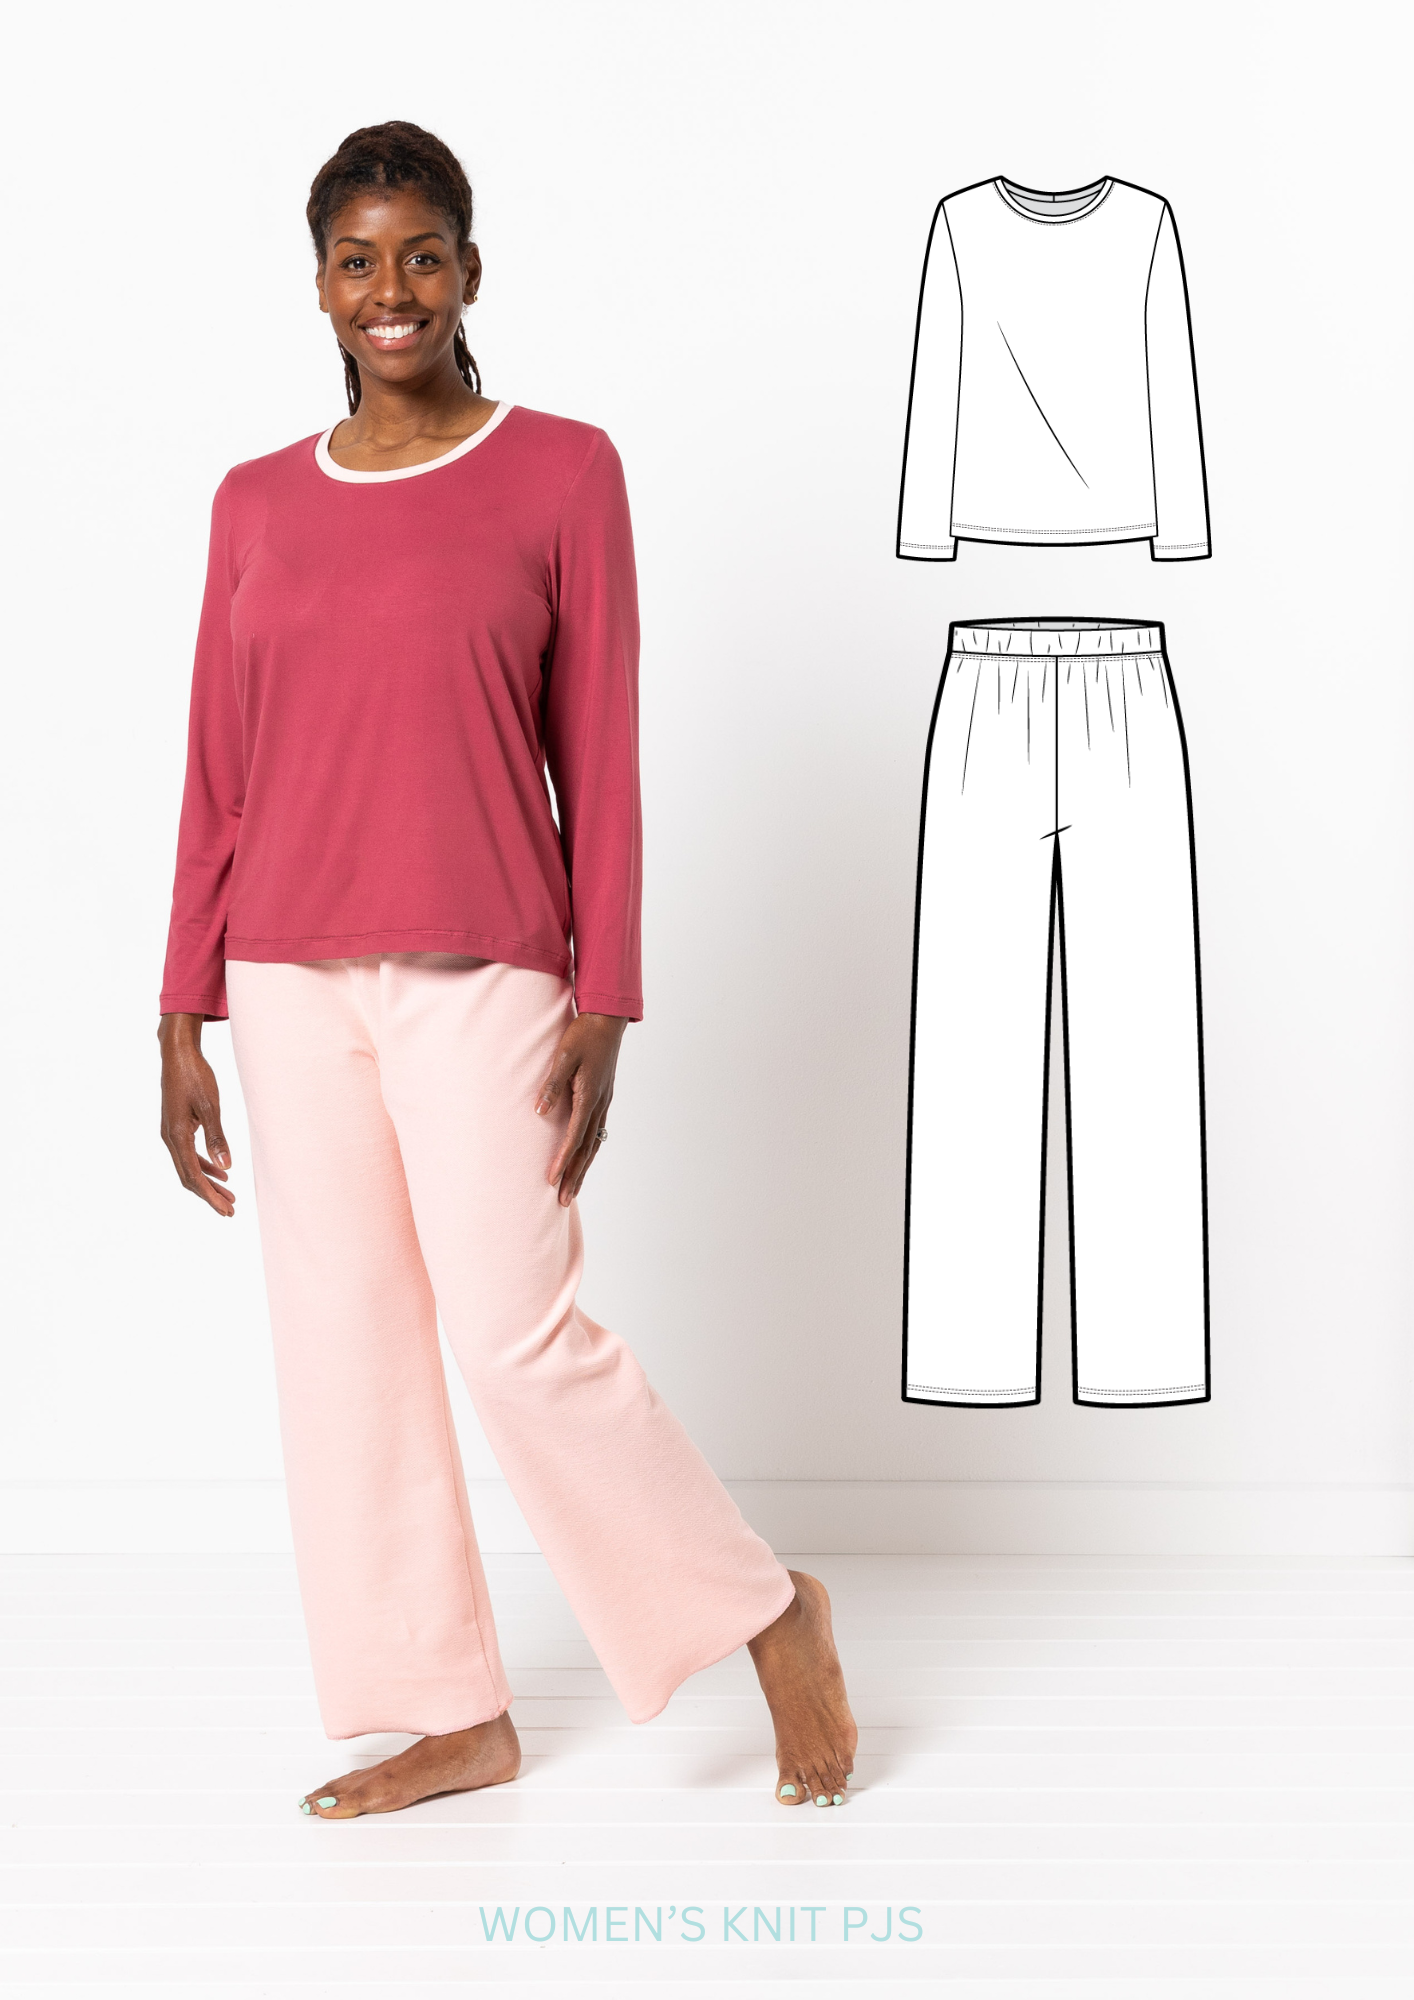 Women's Knit PJs - FREE with any purchase until November 30!